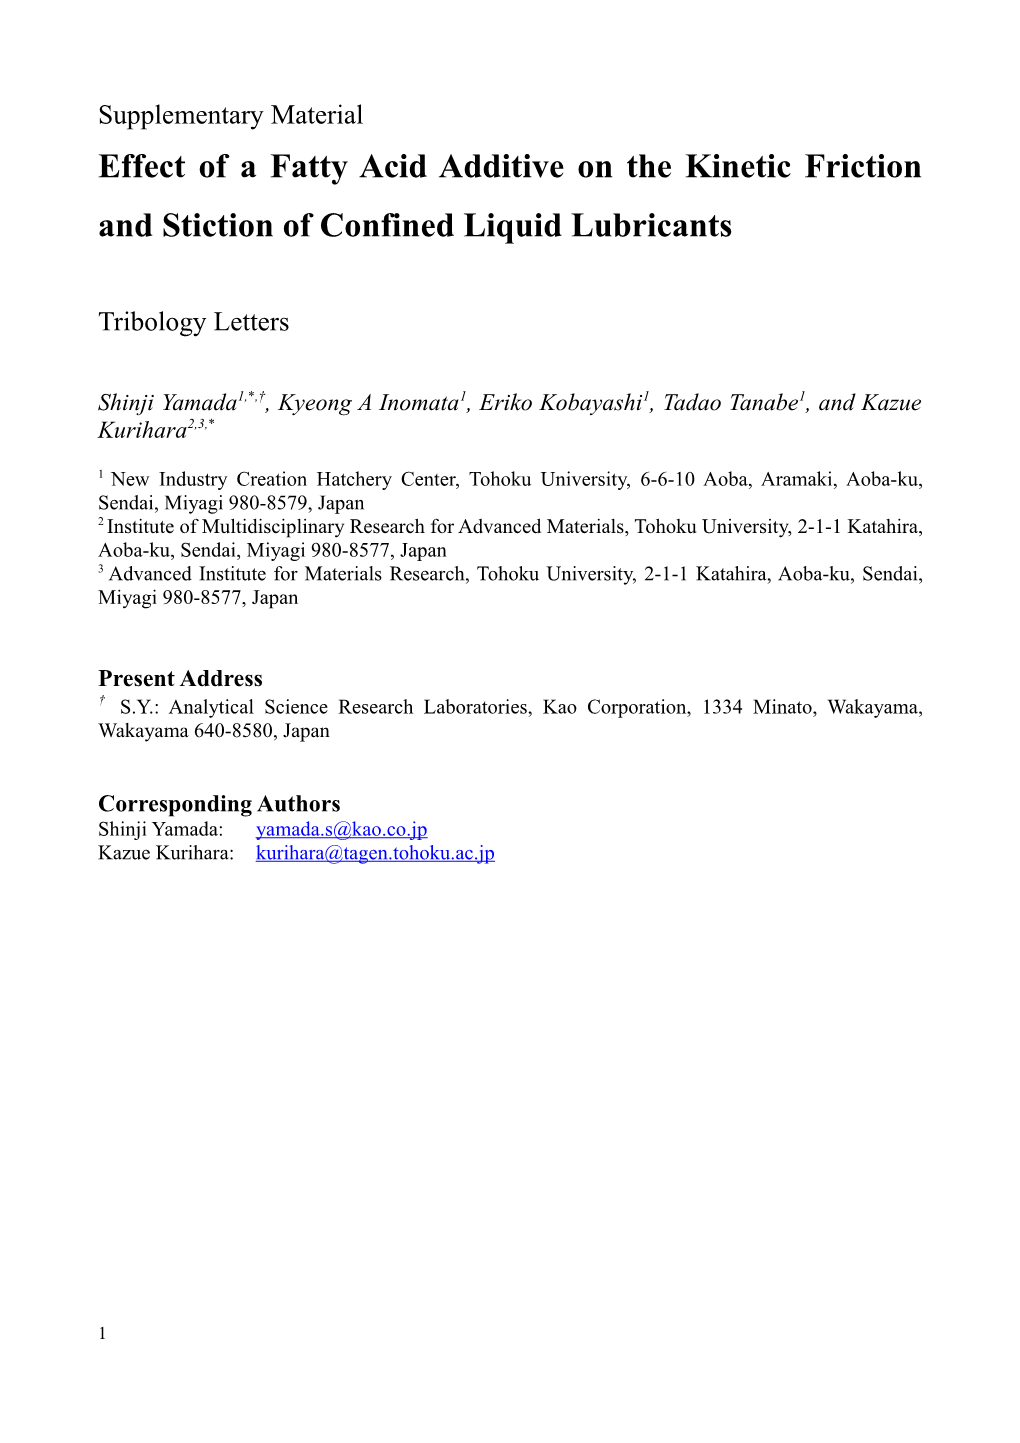 Effect of a Fatty Acid Additive on the Kinetic Friction and Stiction of Confined Liquid